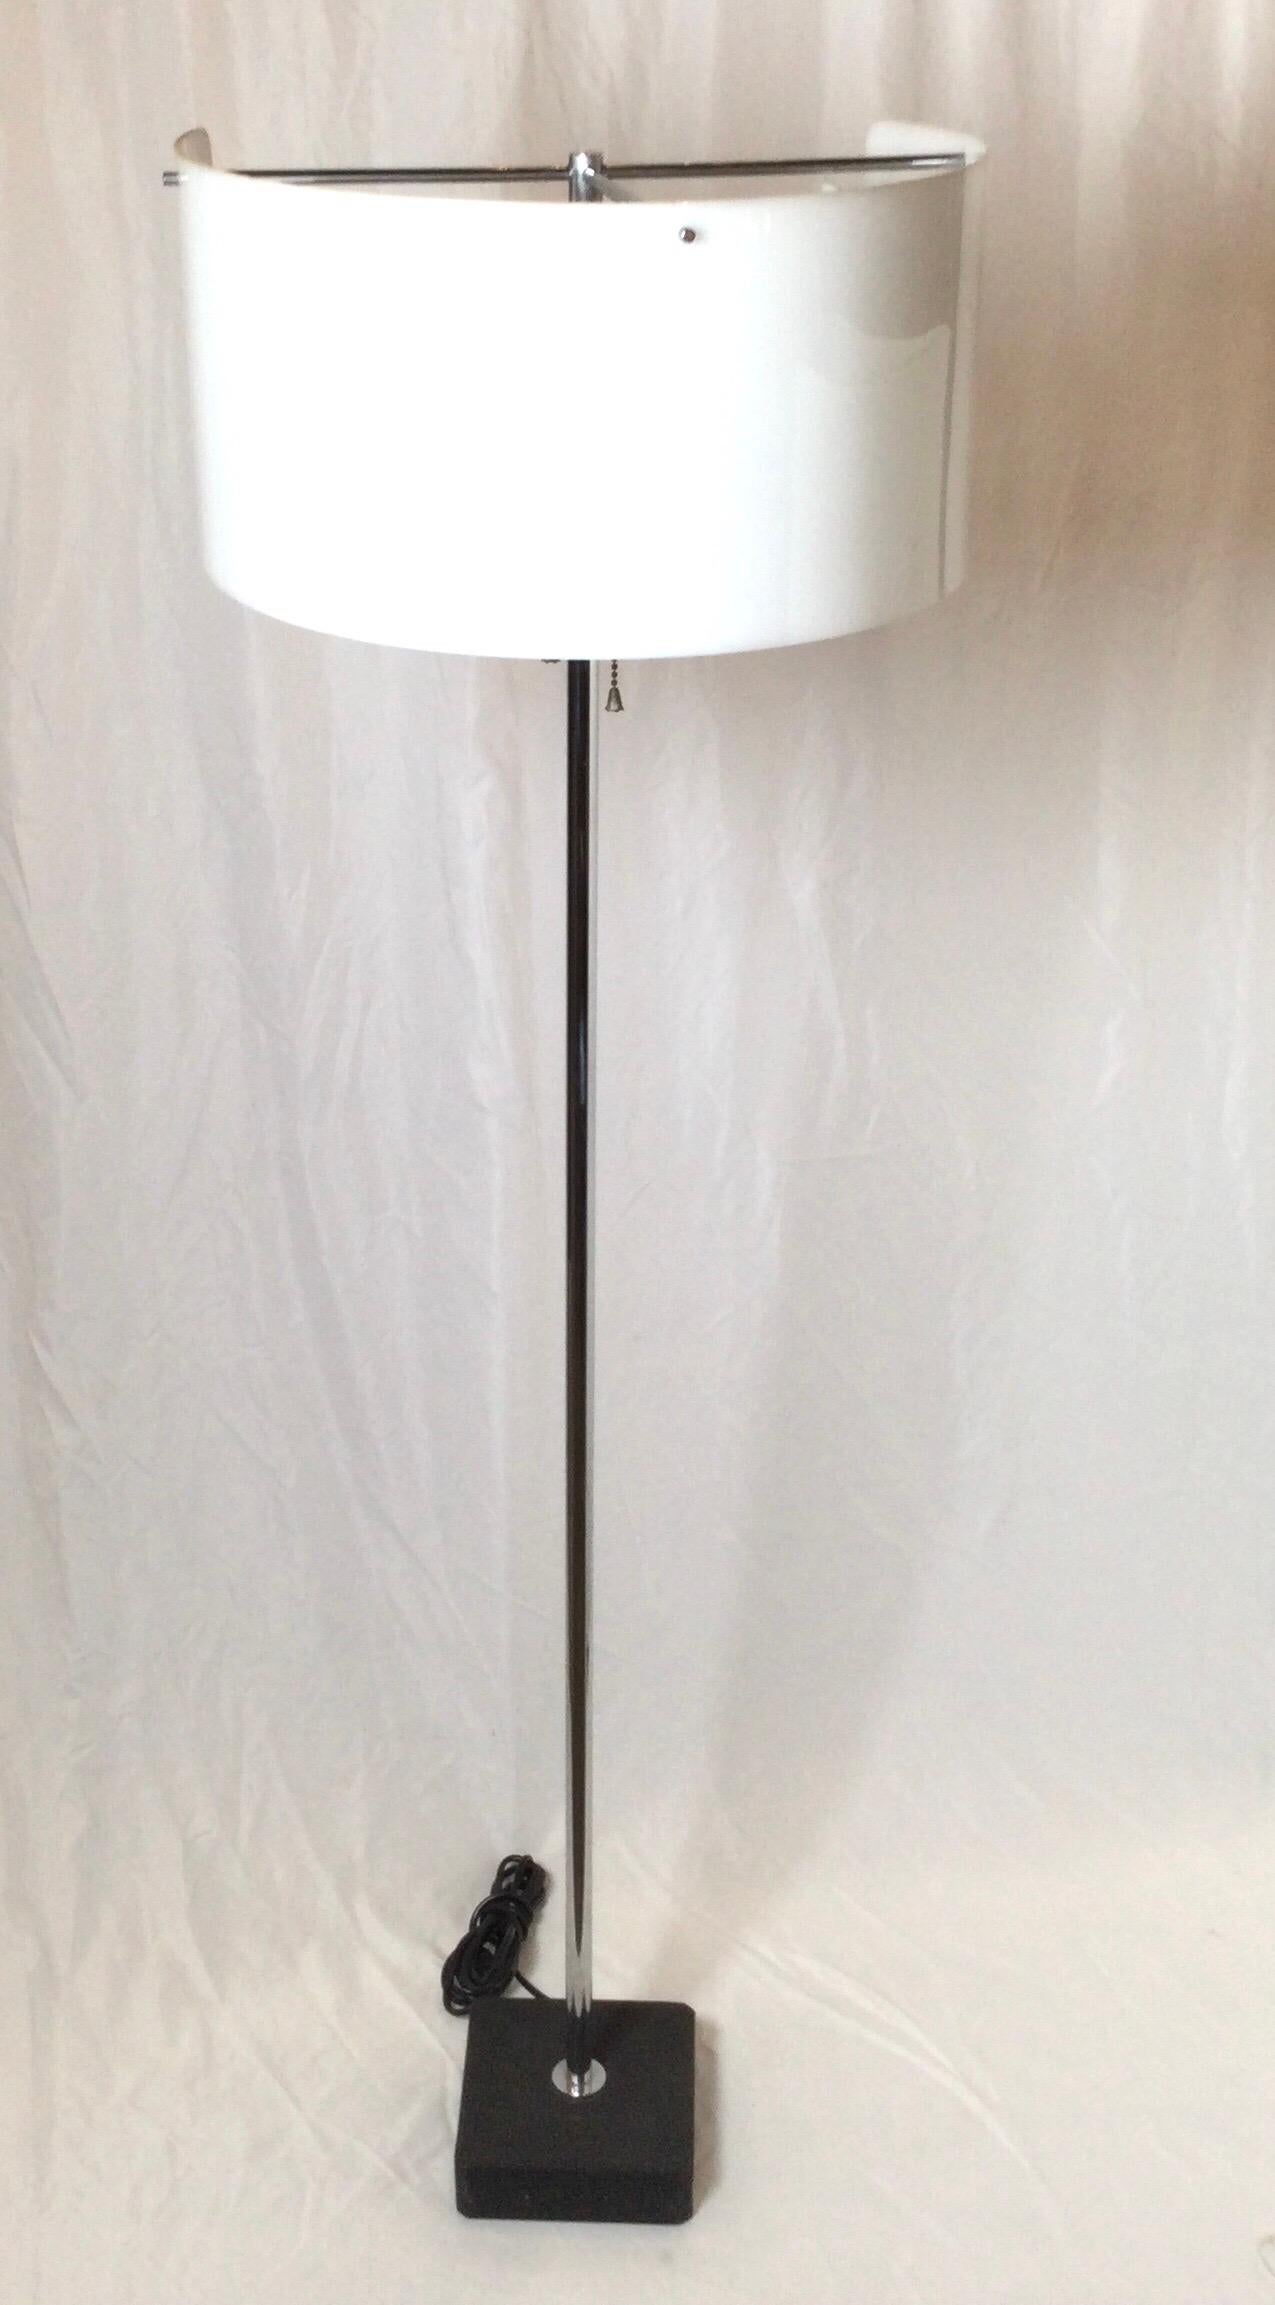 A chrome-plated and enameled aluminum floor lamp with powder-coated steel base, acrylic shade
Decal manufacturer's label to shade ‘AL Milano Arteluce Made in Italy’.